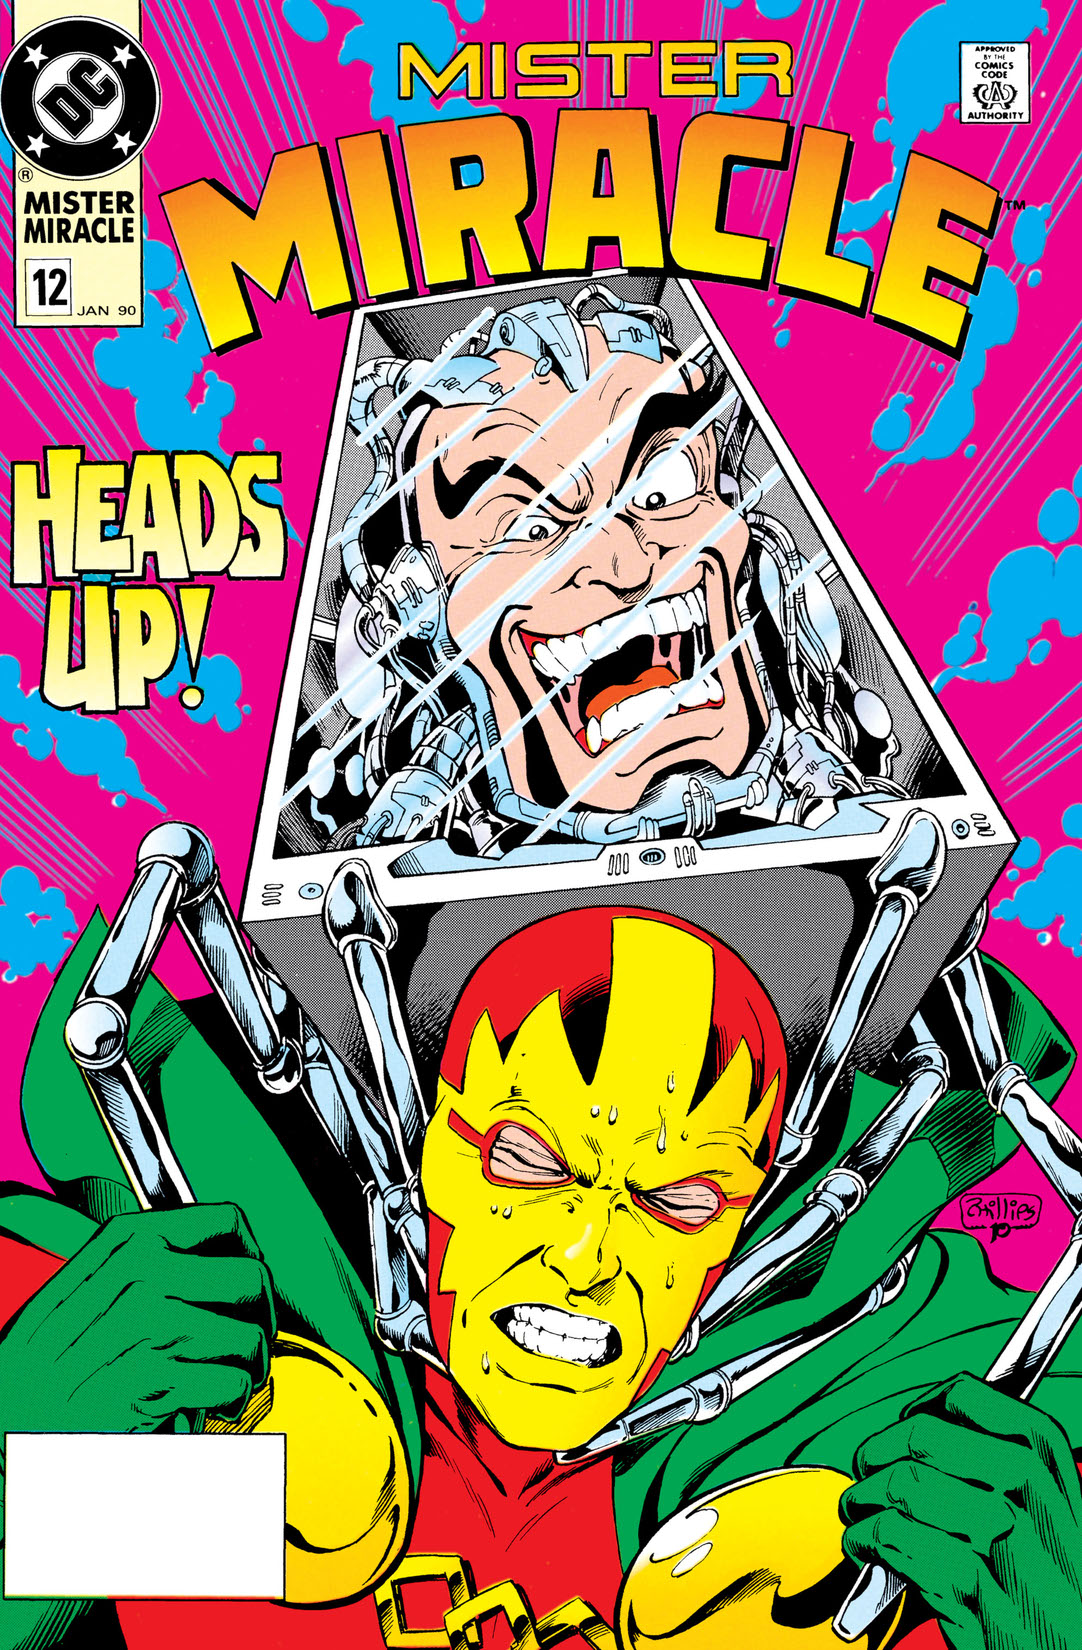 Mister Miracle (1988-) #12 preview images